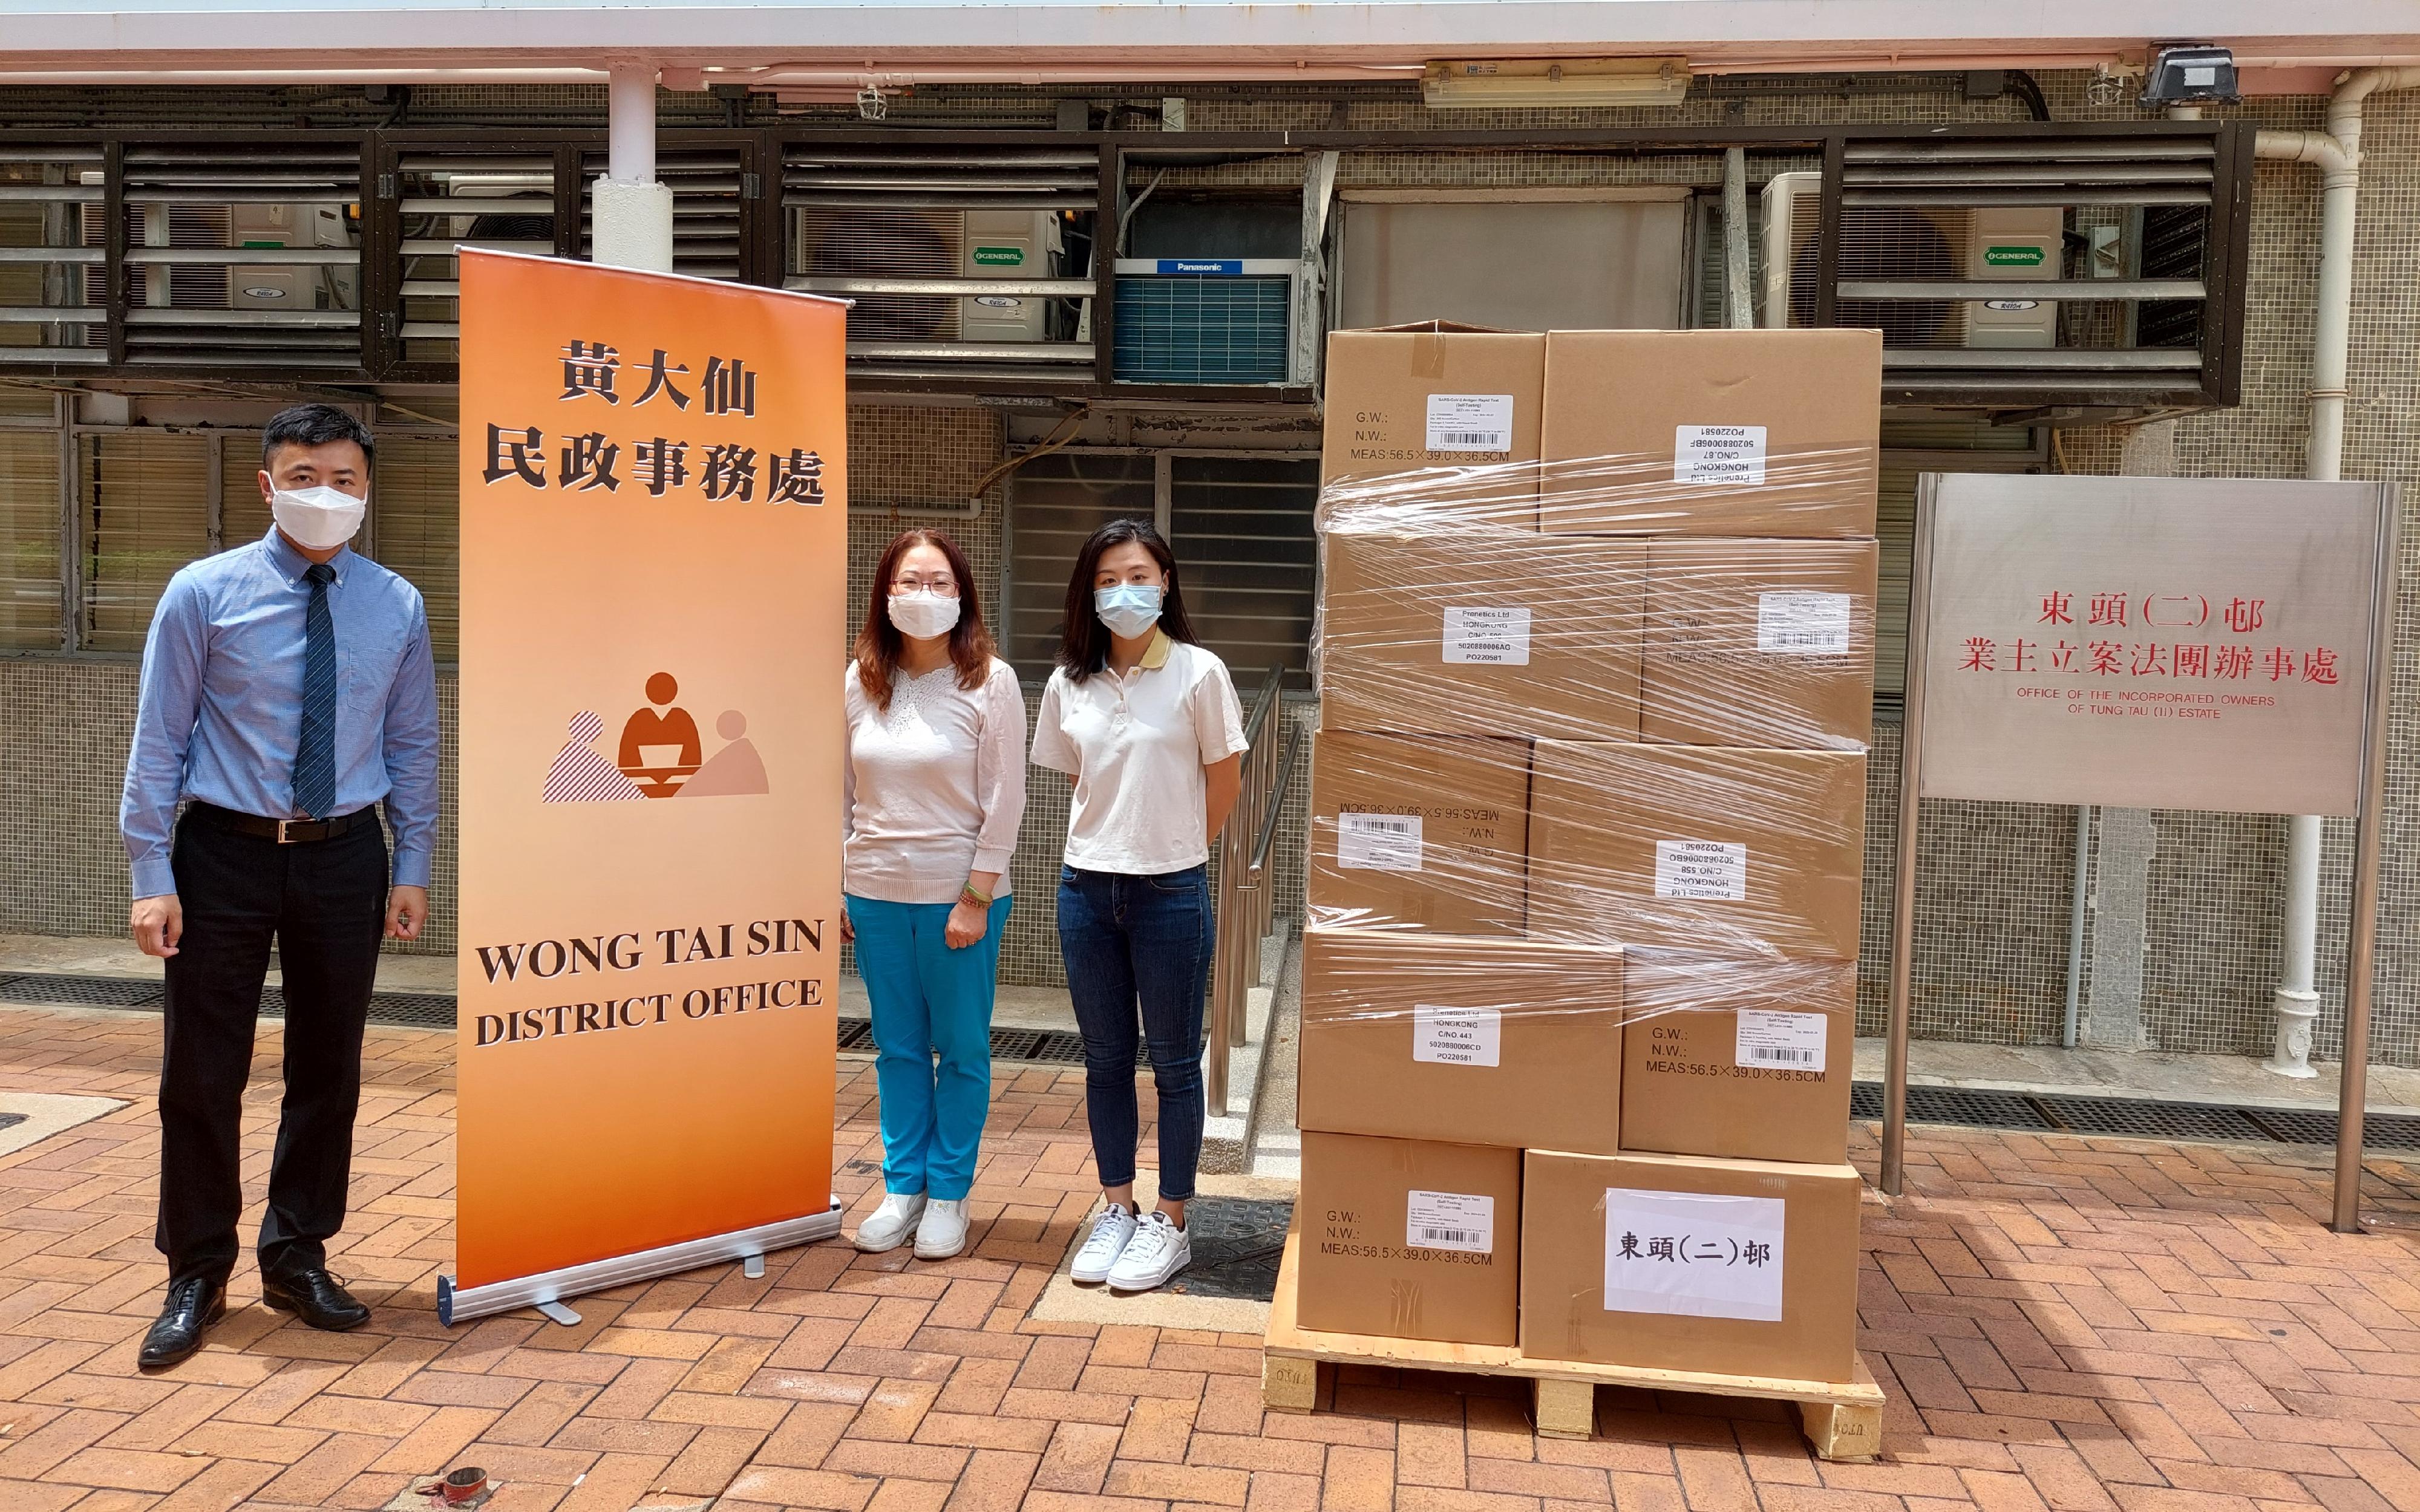 The Wong Tai Sin District Office today (June 6) distributed COVID-19 rapid test kits to households, cleansing workers and property management staff living and working in Tung Tau (II) Estate for voluntary testing through the property management company.